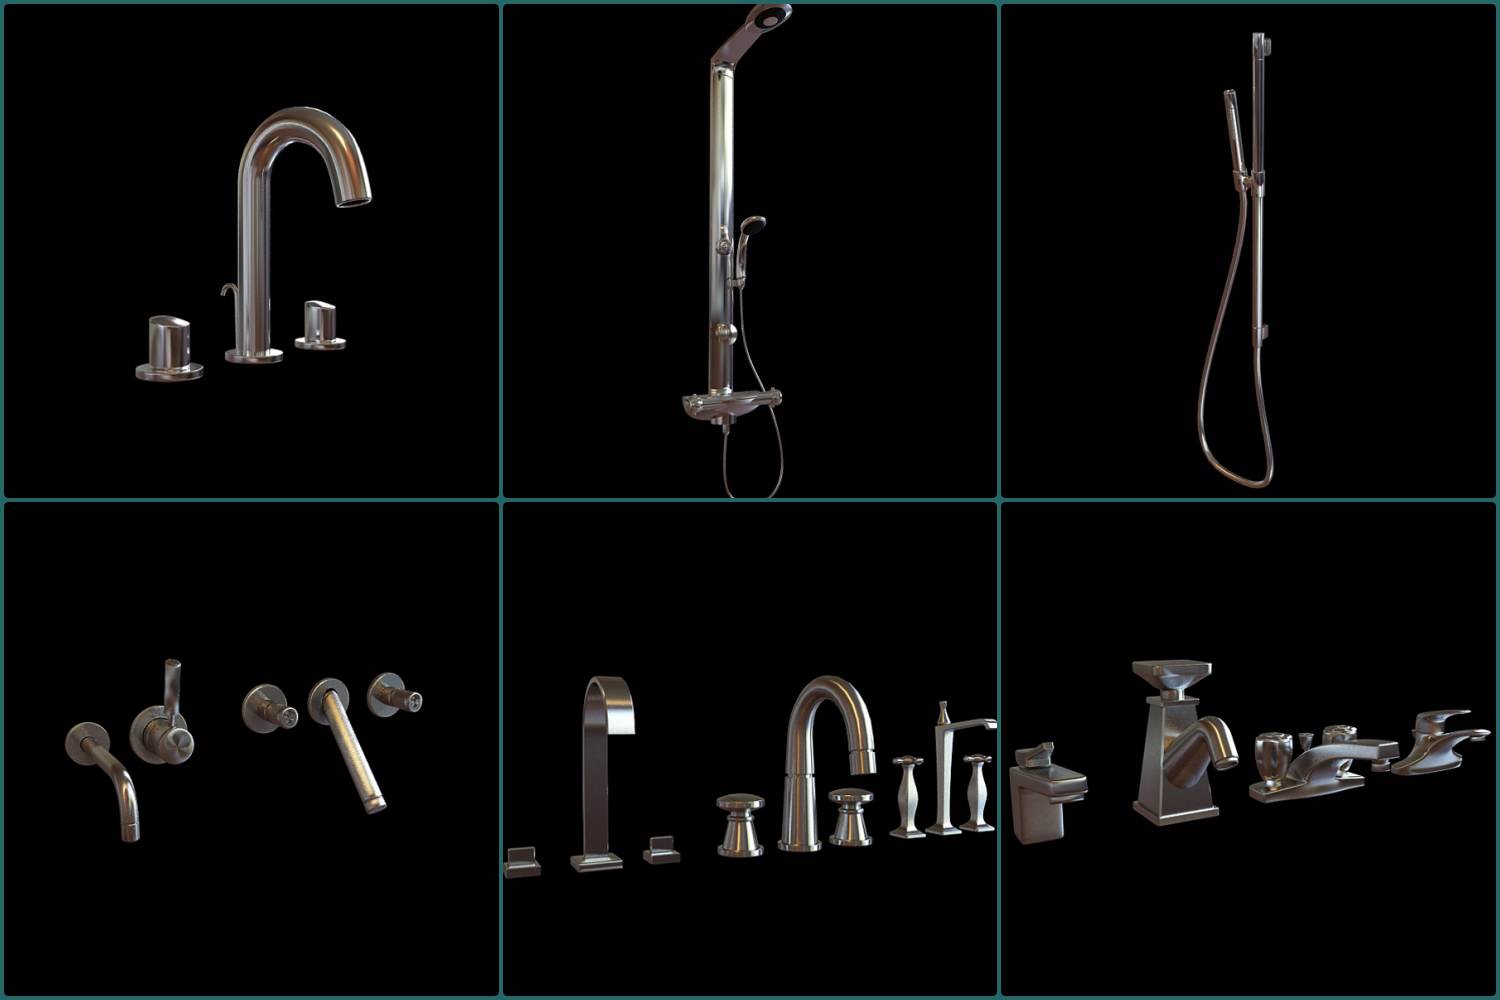 11253. A Collection Of Faucets 3dsmax Models Free Download